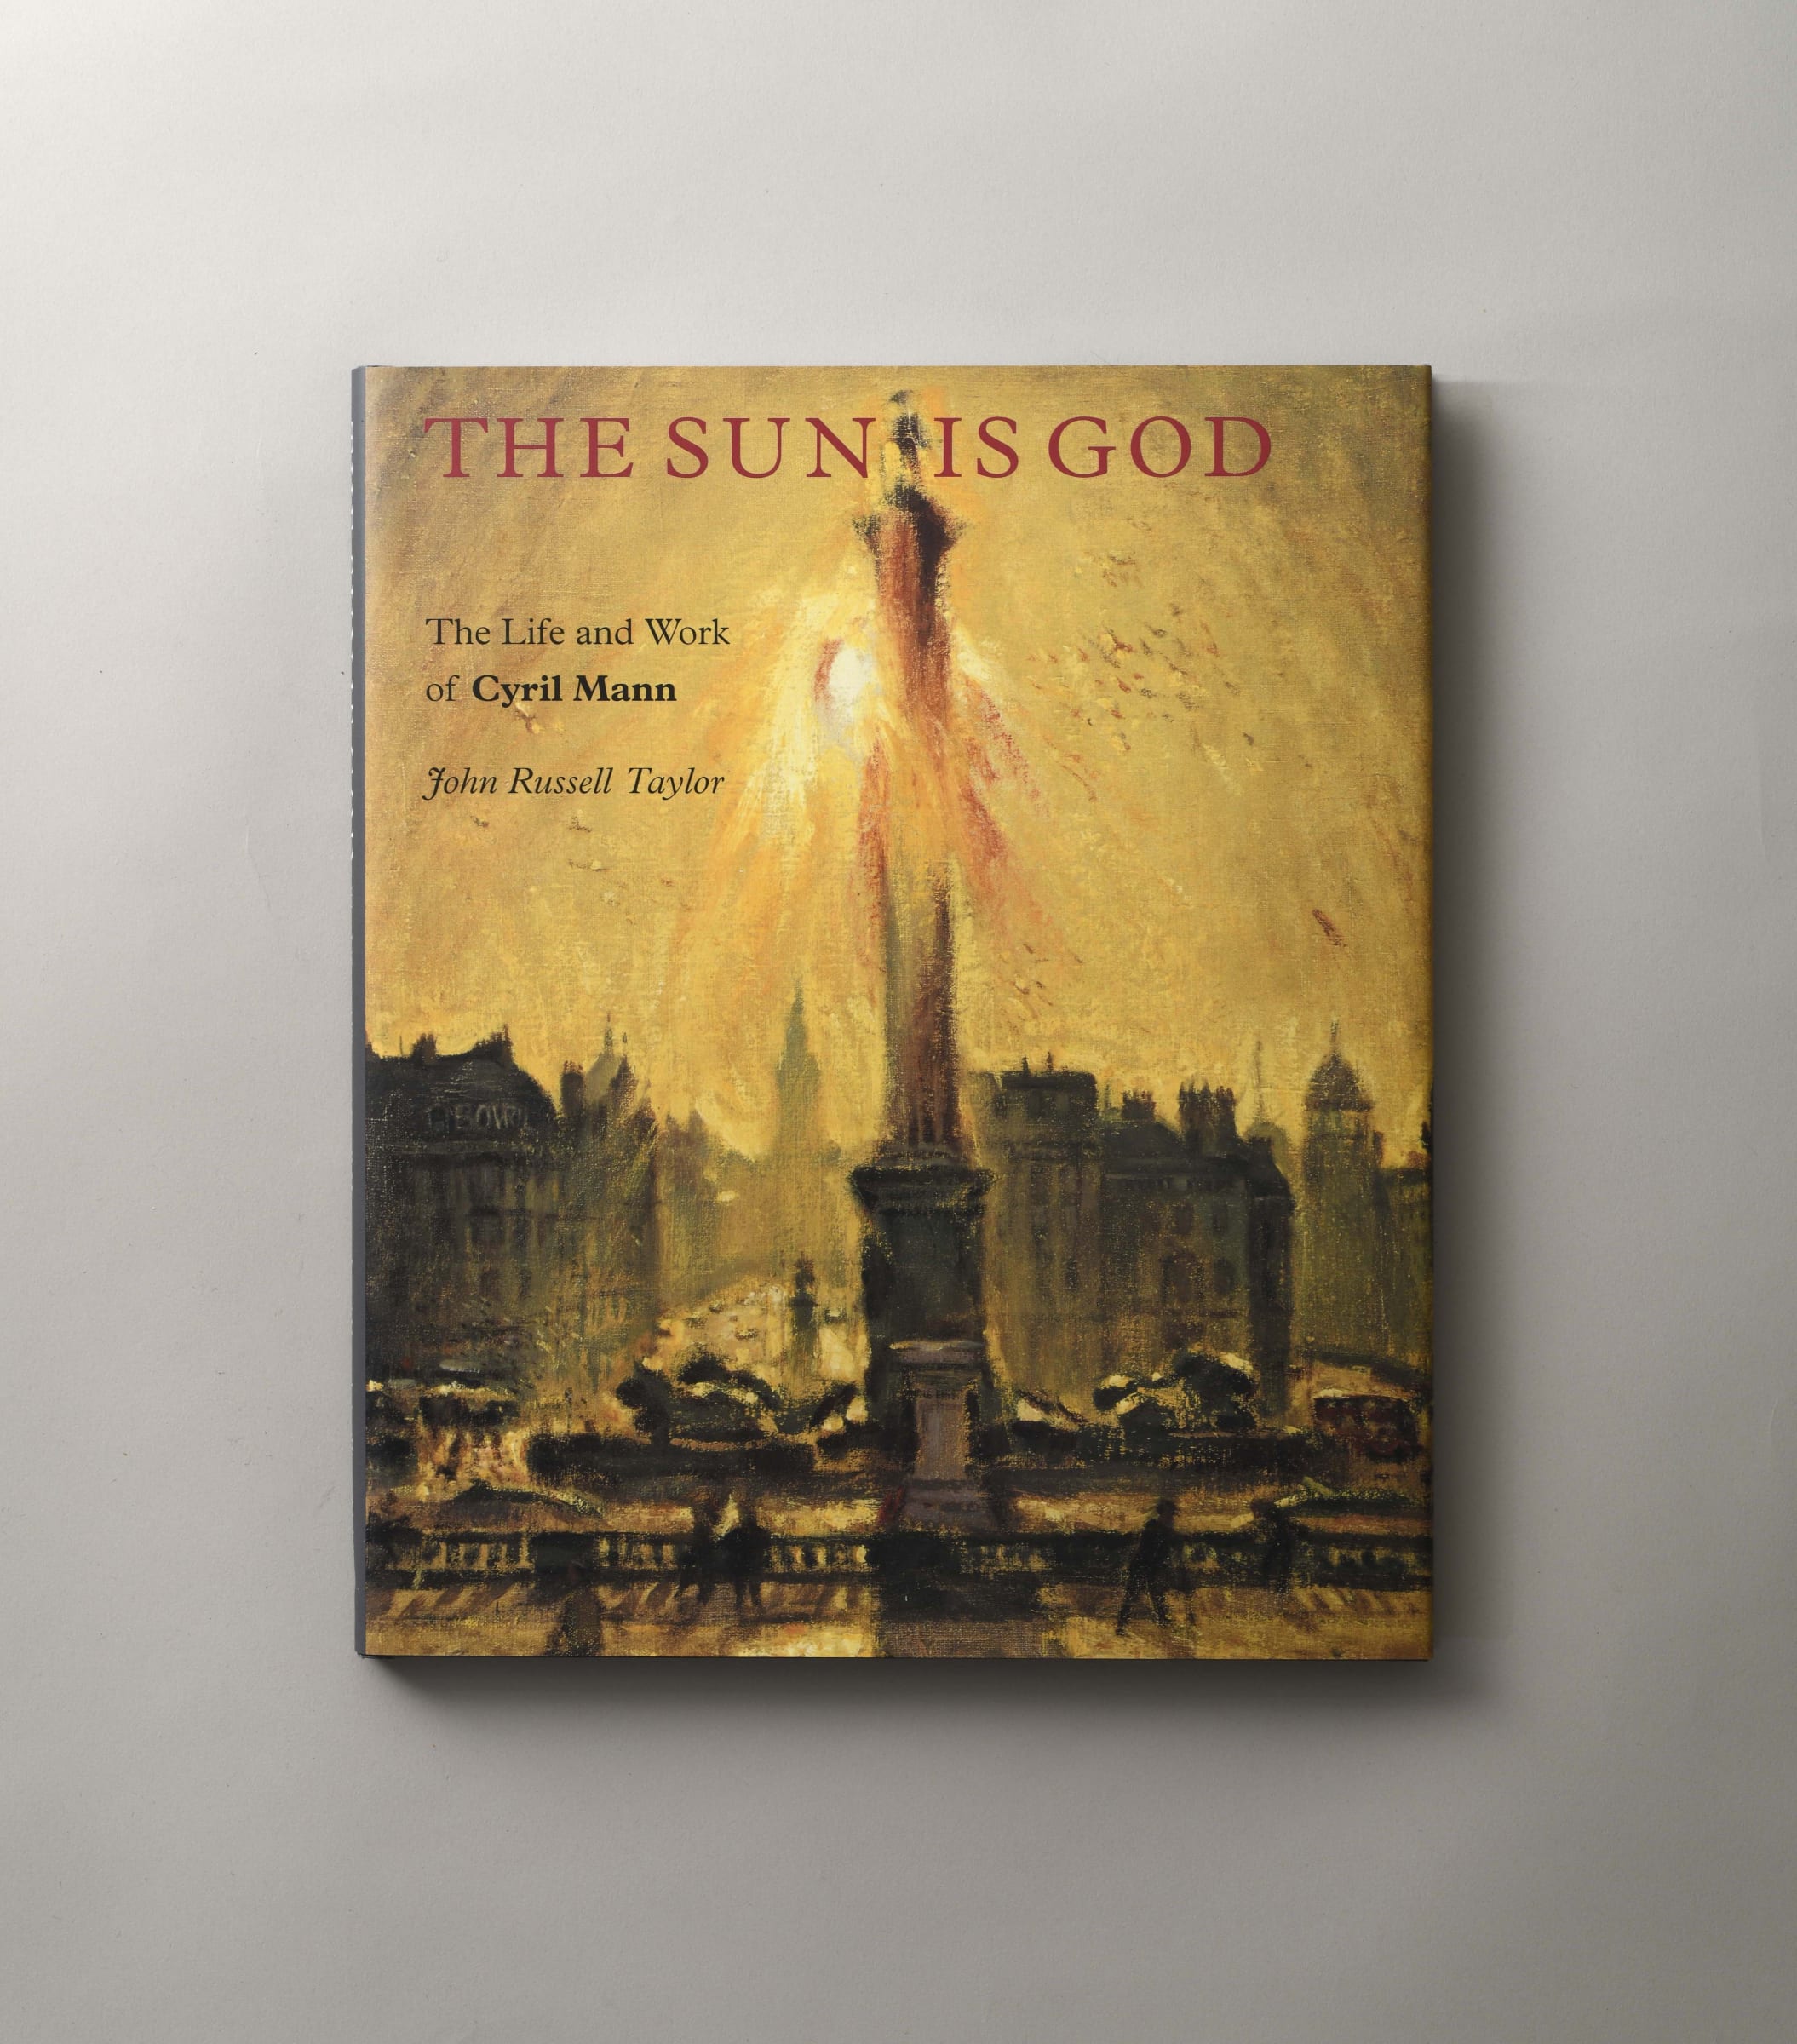 Publication: The Sun is God - The Life and Work of Cyril Mann (1911-80